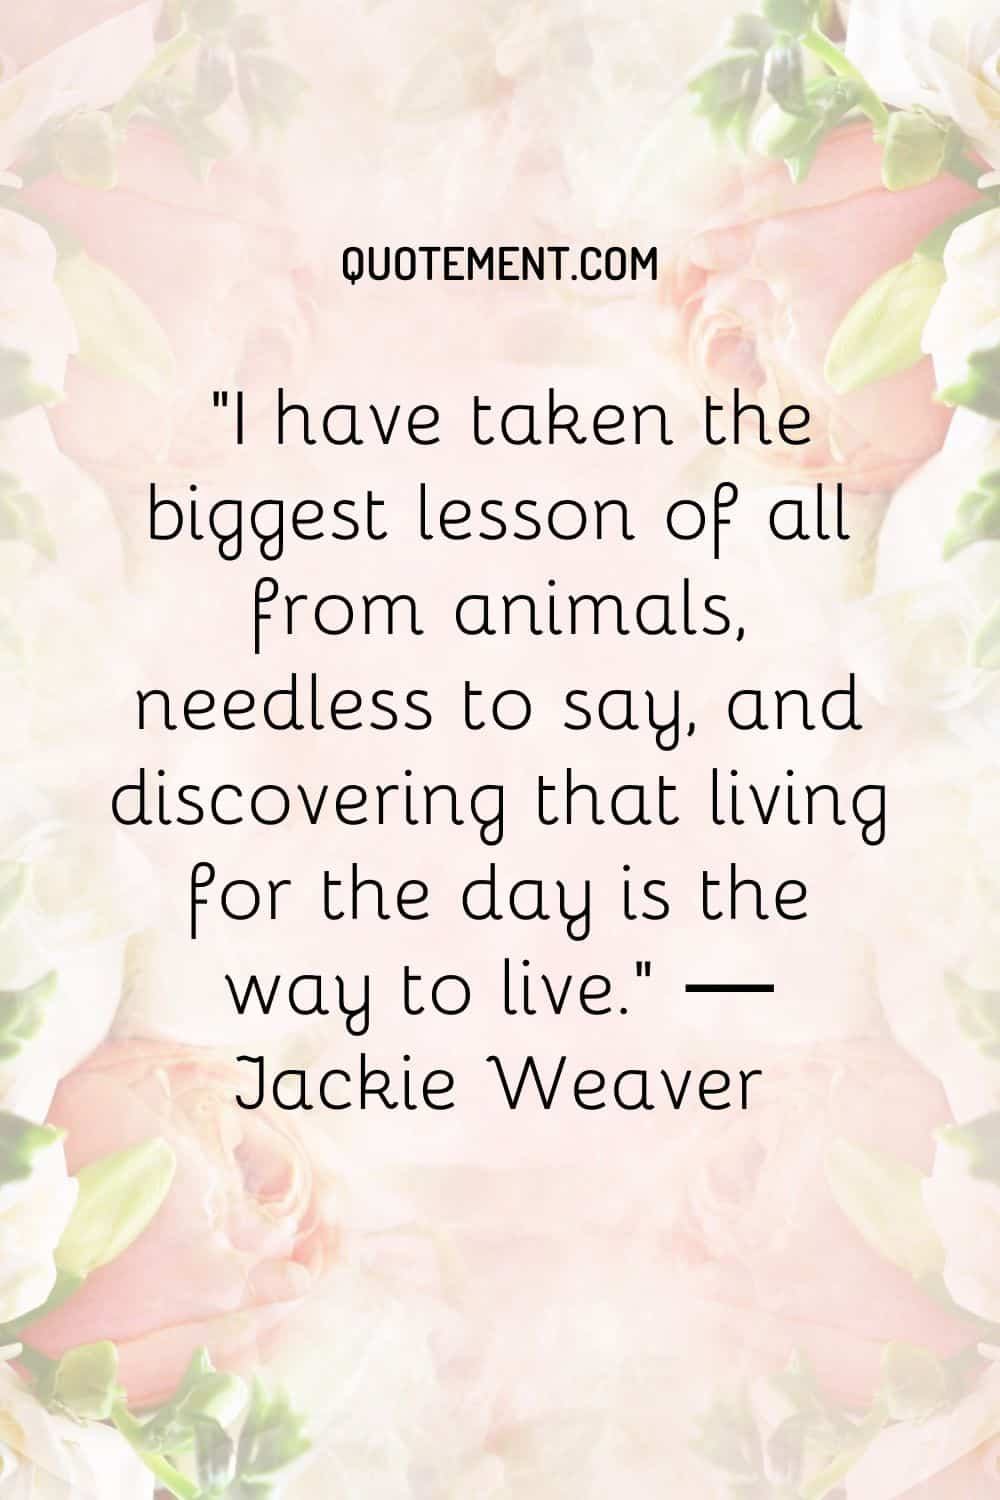 I have taken the biggest lesson of all from animals, needless to say, and discovering that living for the day is the way to live